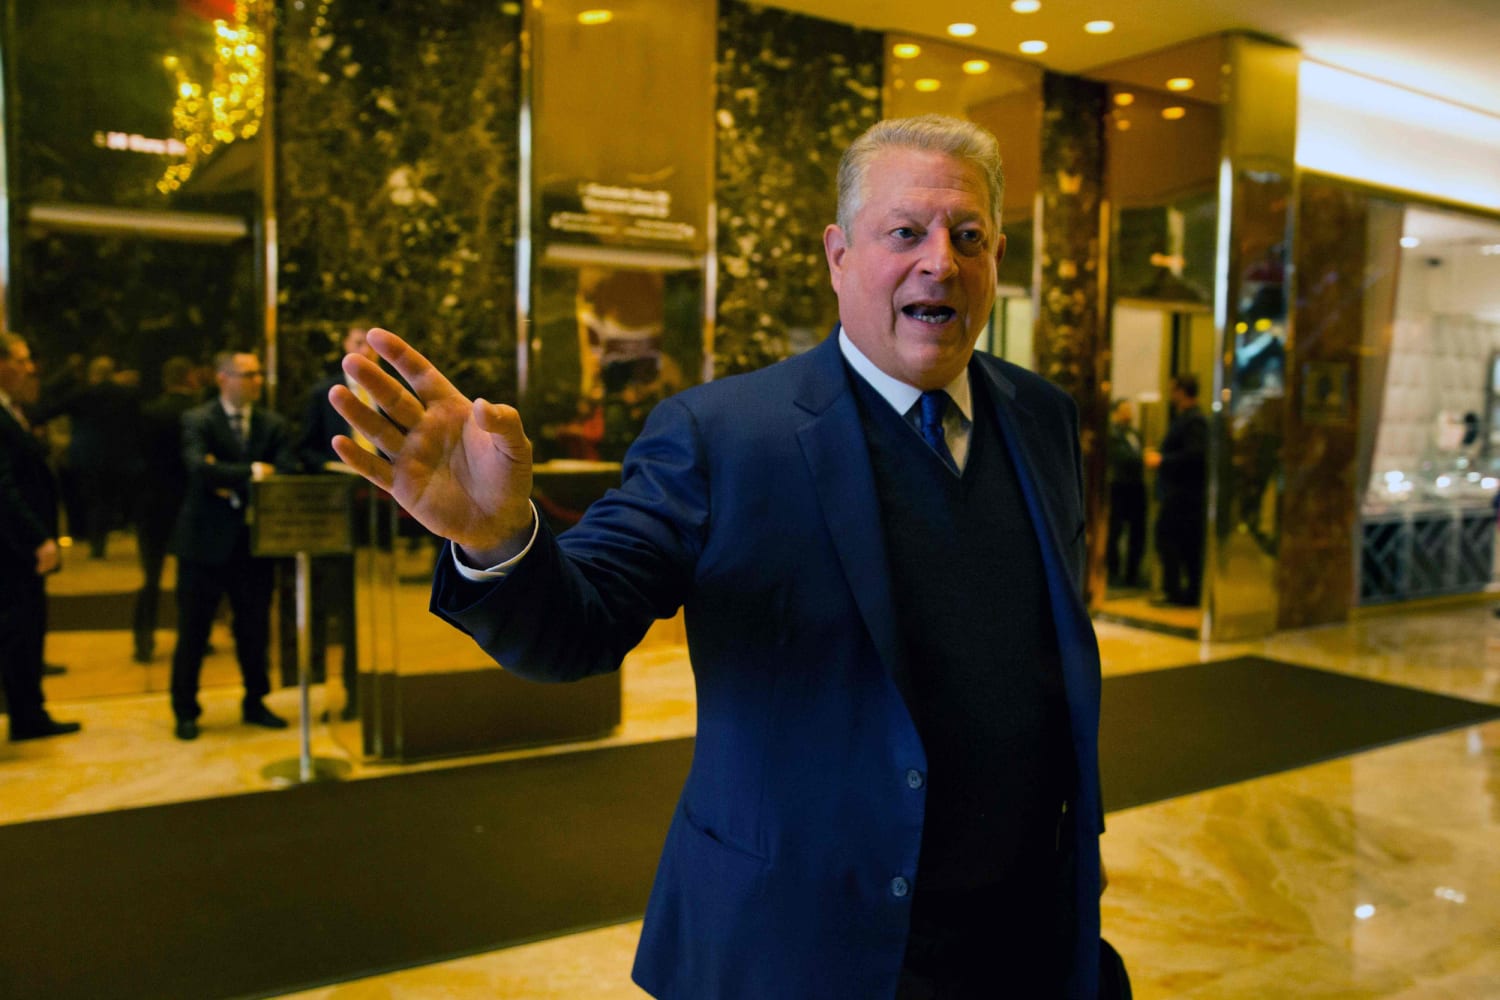 Al Gore Meets Donald Trump for 'Extremely Interesting' Conversation